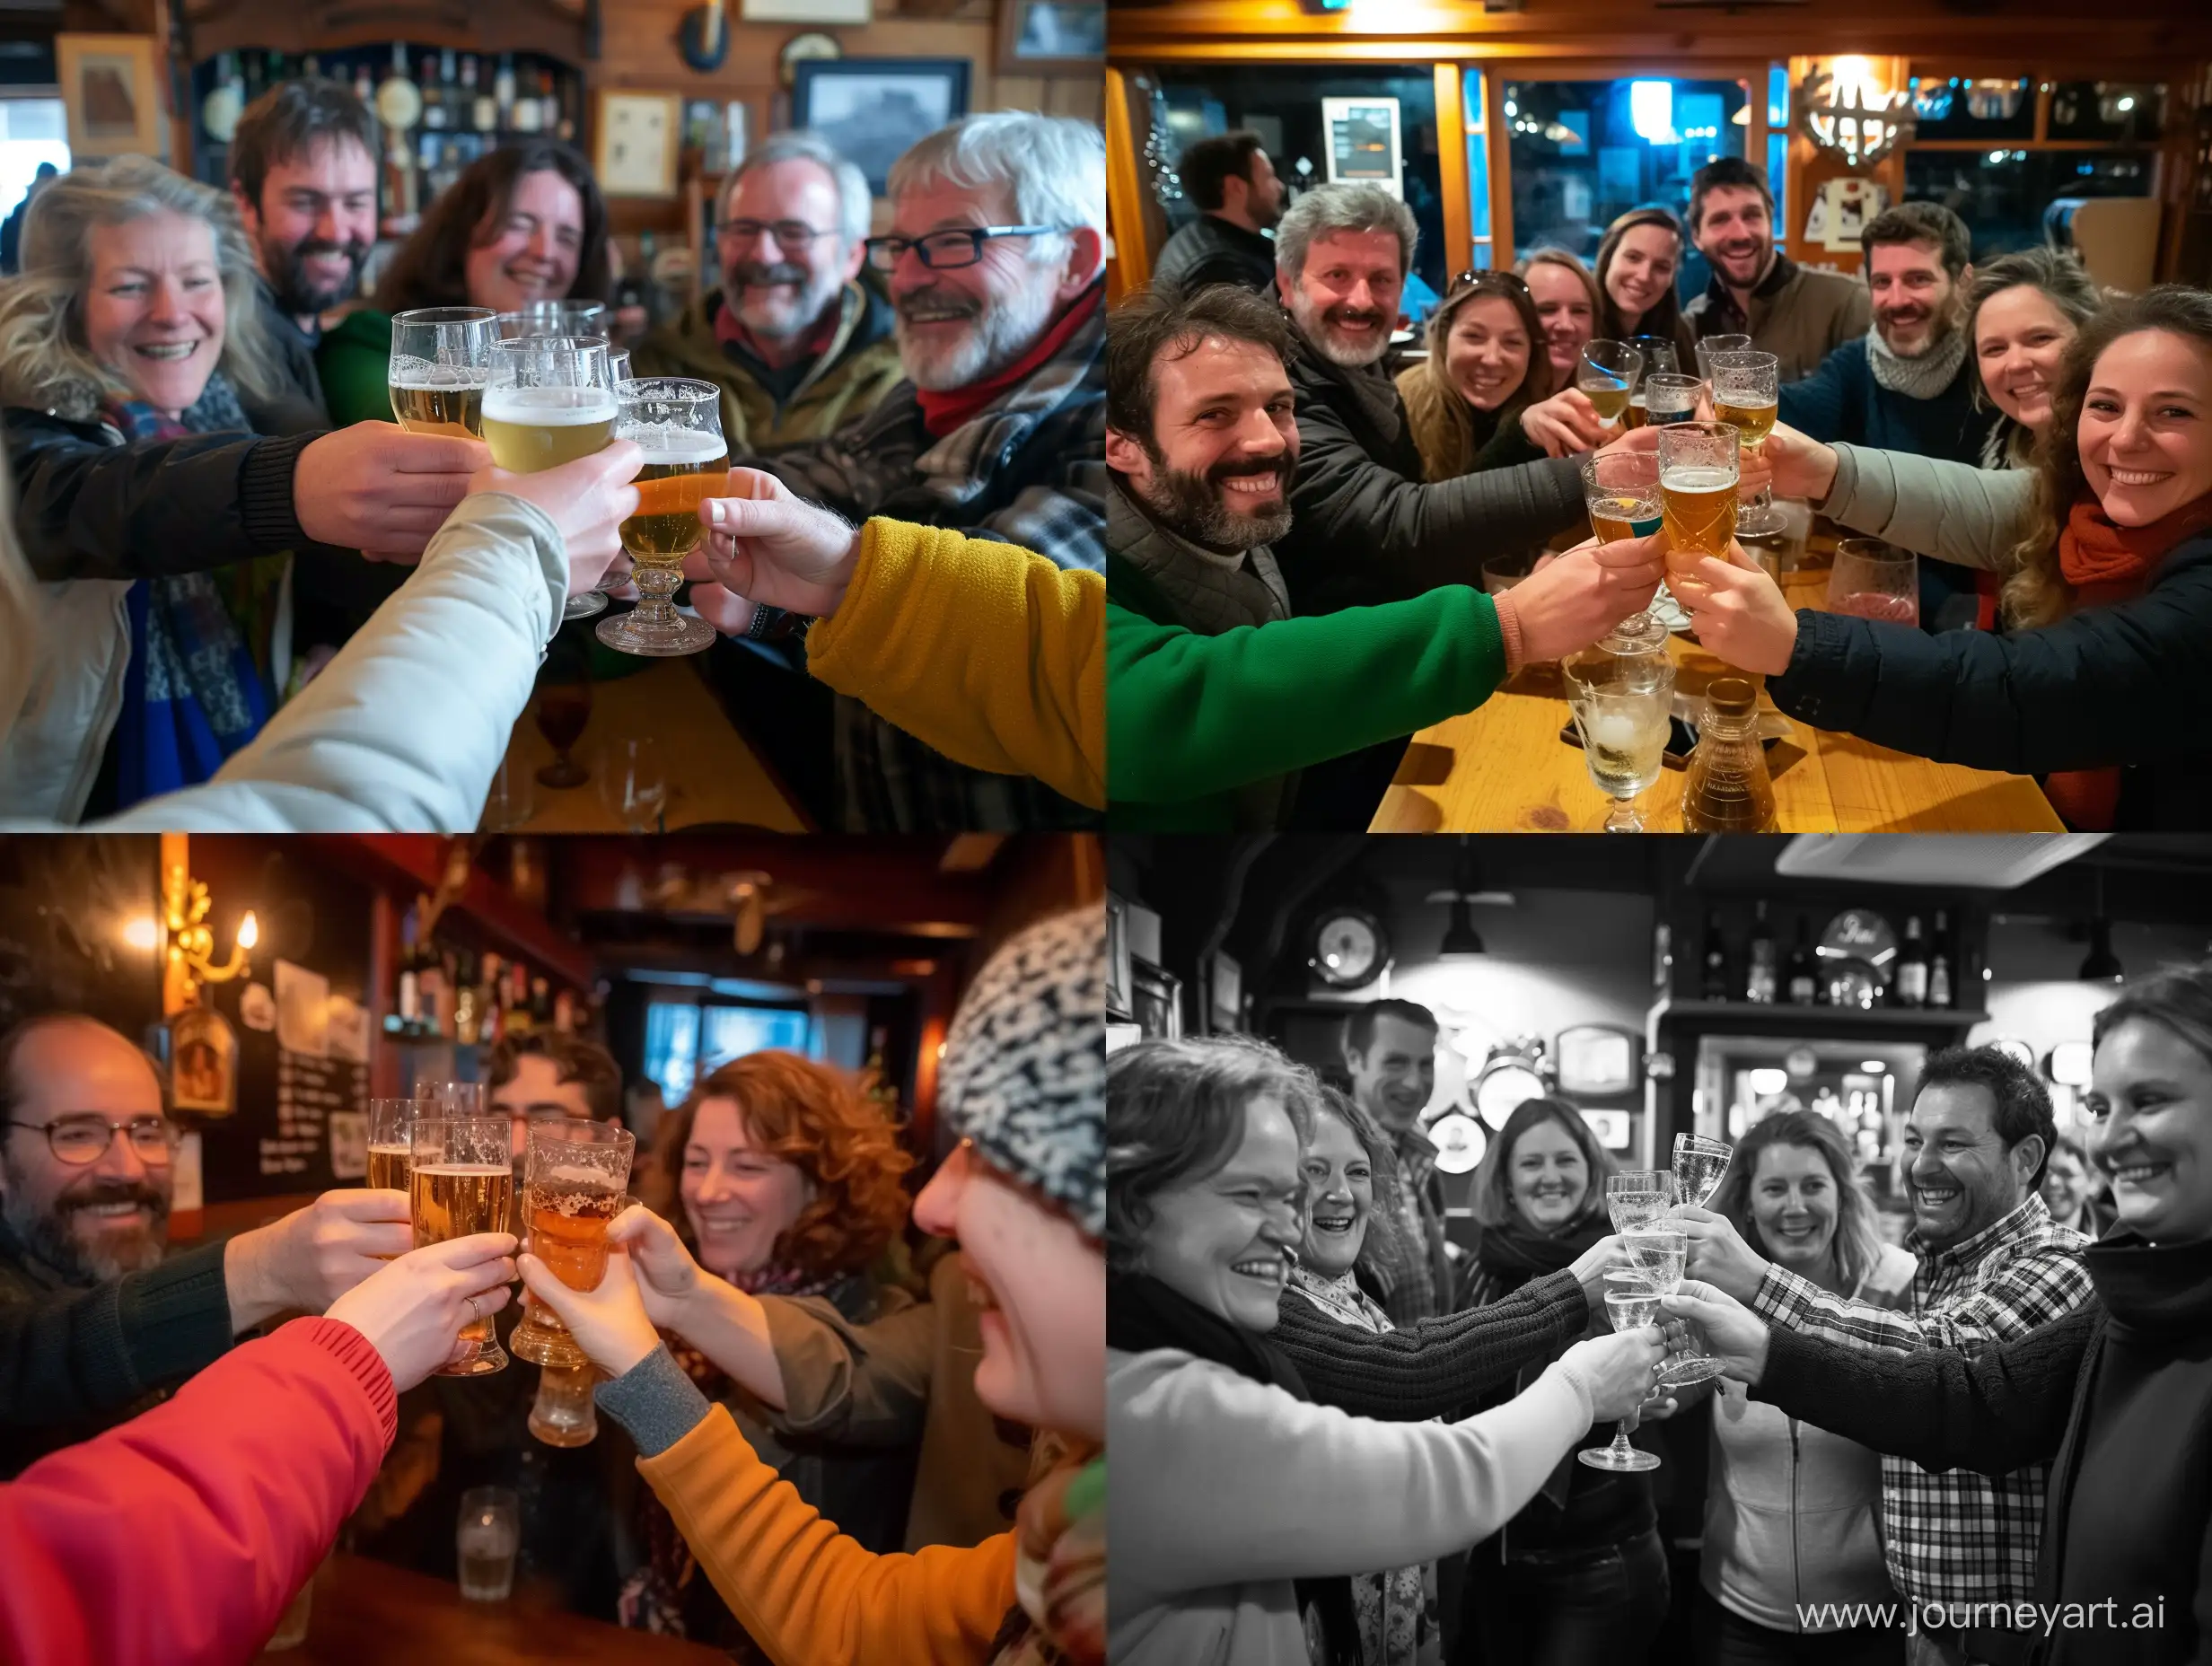 Lively-Winter-Gathering-in-Lorient-Pub-Joyful-Moments-with-13-Friends-Toasting